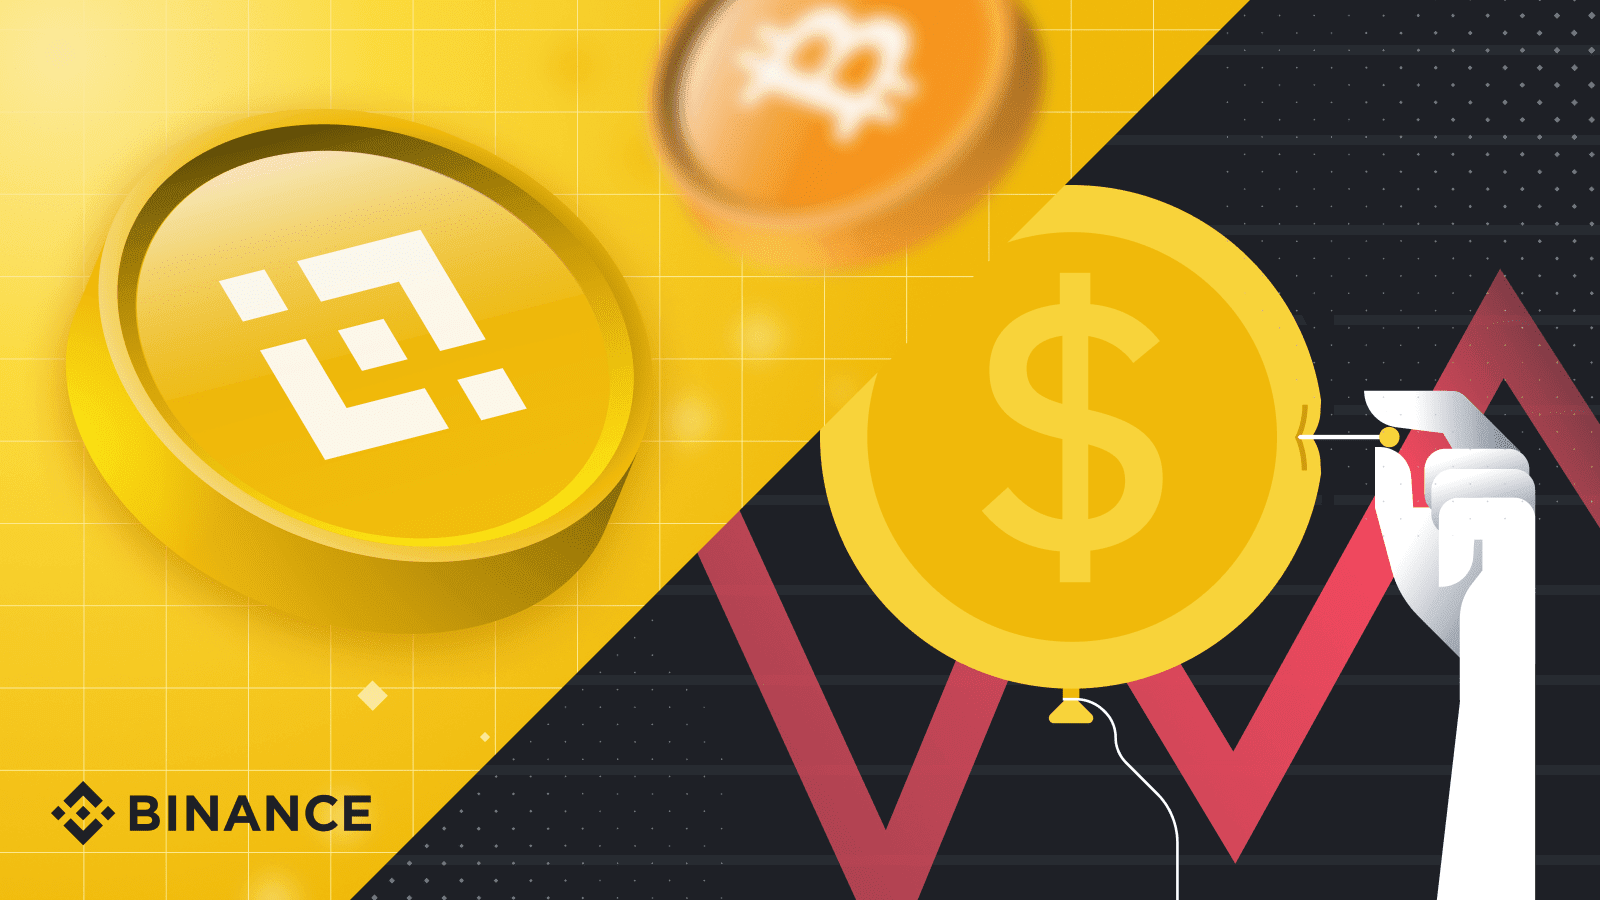 The number of Binance users increases due to inflation-min